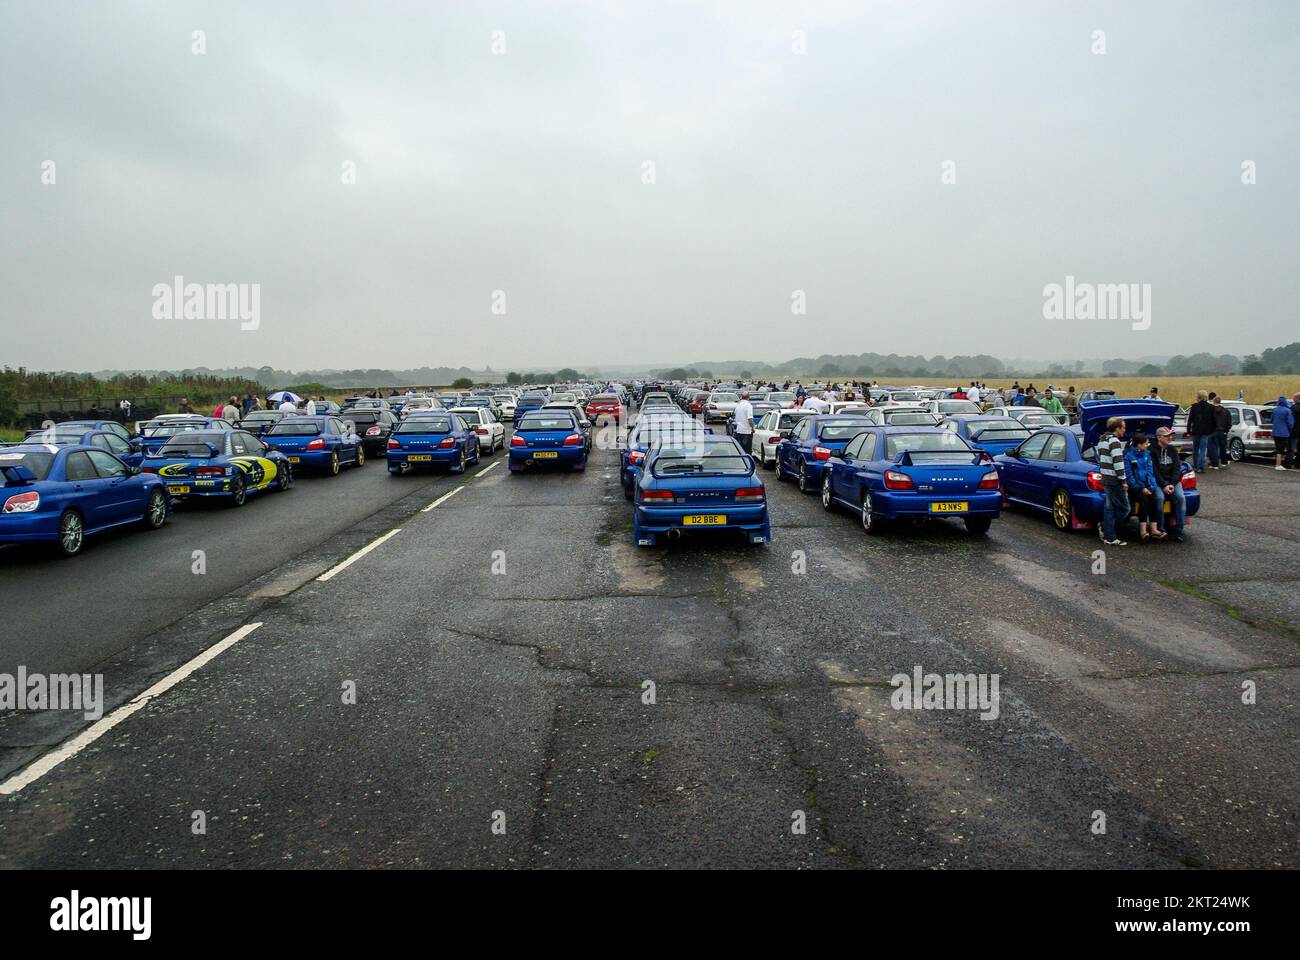 McRae Gathering of Subaru Imprezas. Anniversary of the death Colin McRae around 1200 cars created a record car mosaic on runway at former RAF Honiley Stock Photo